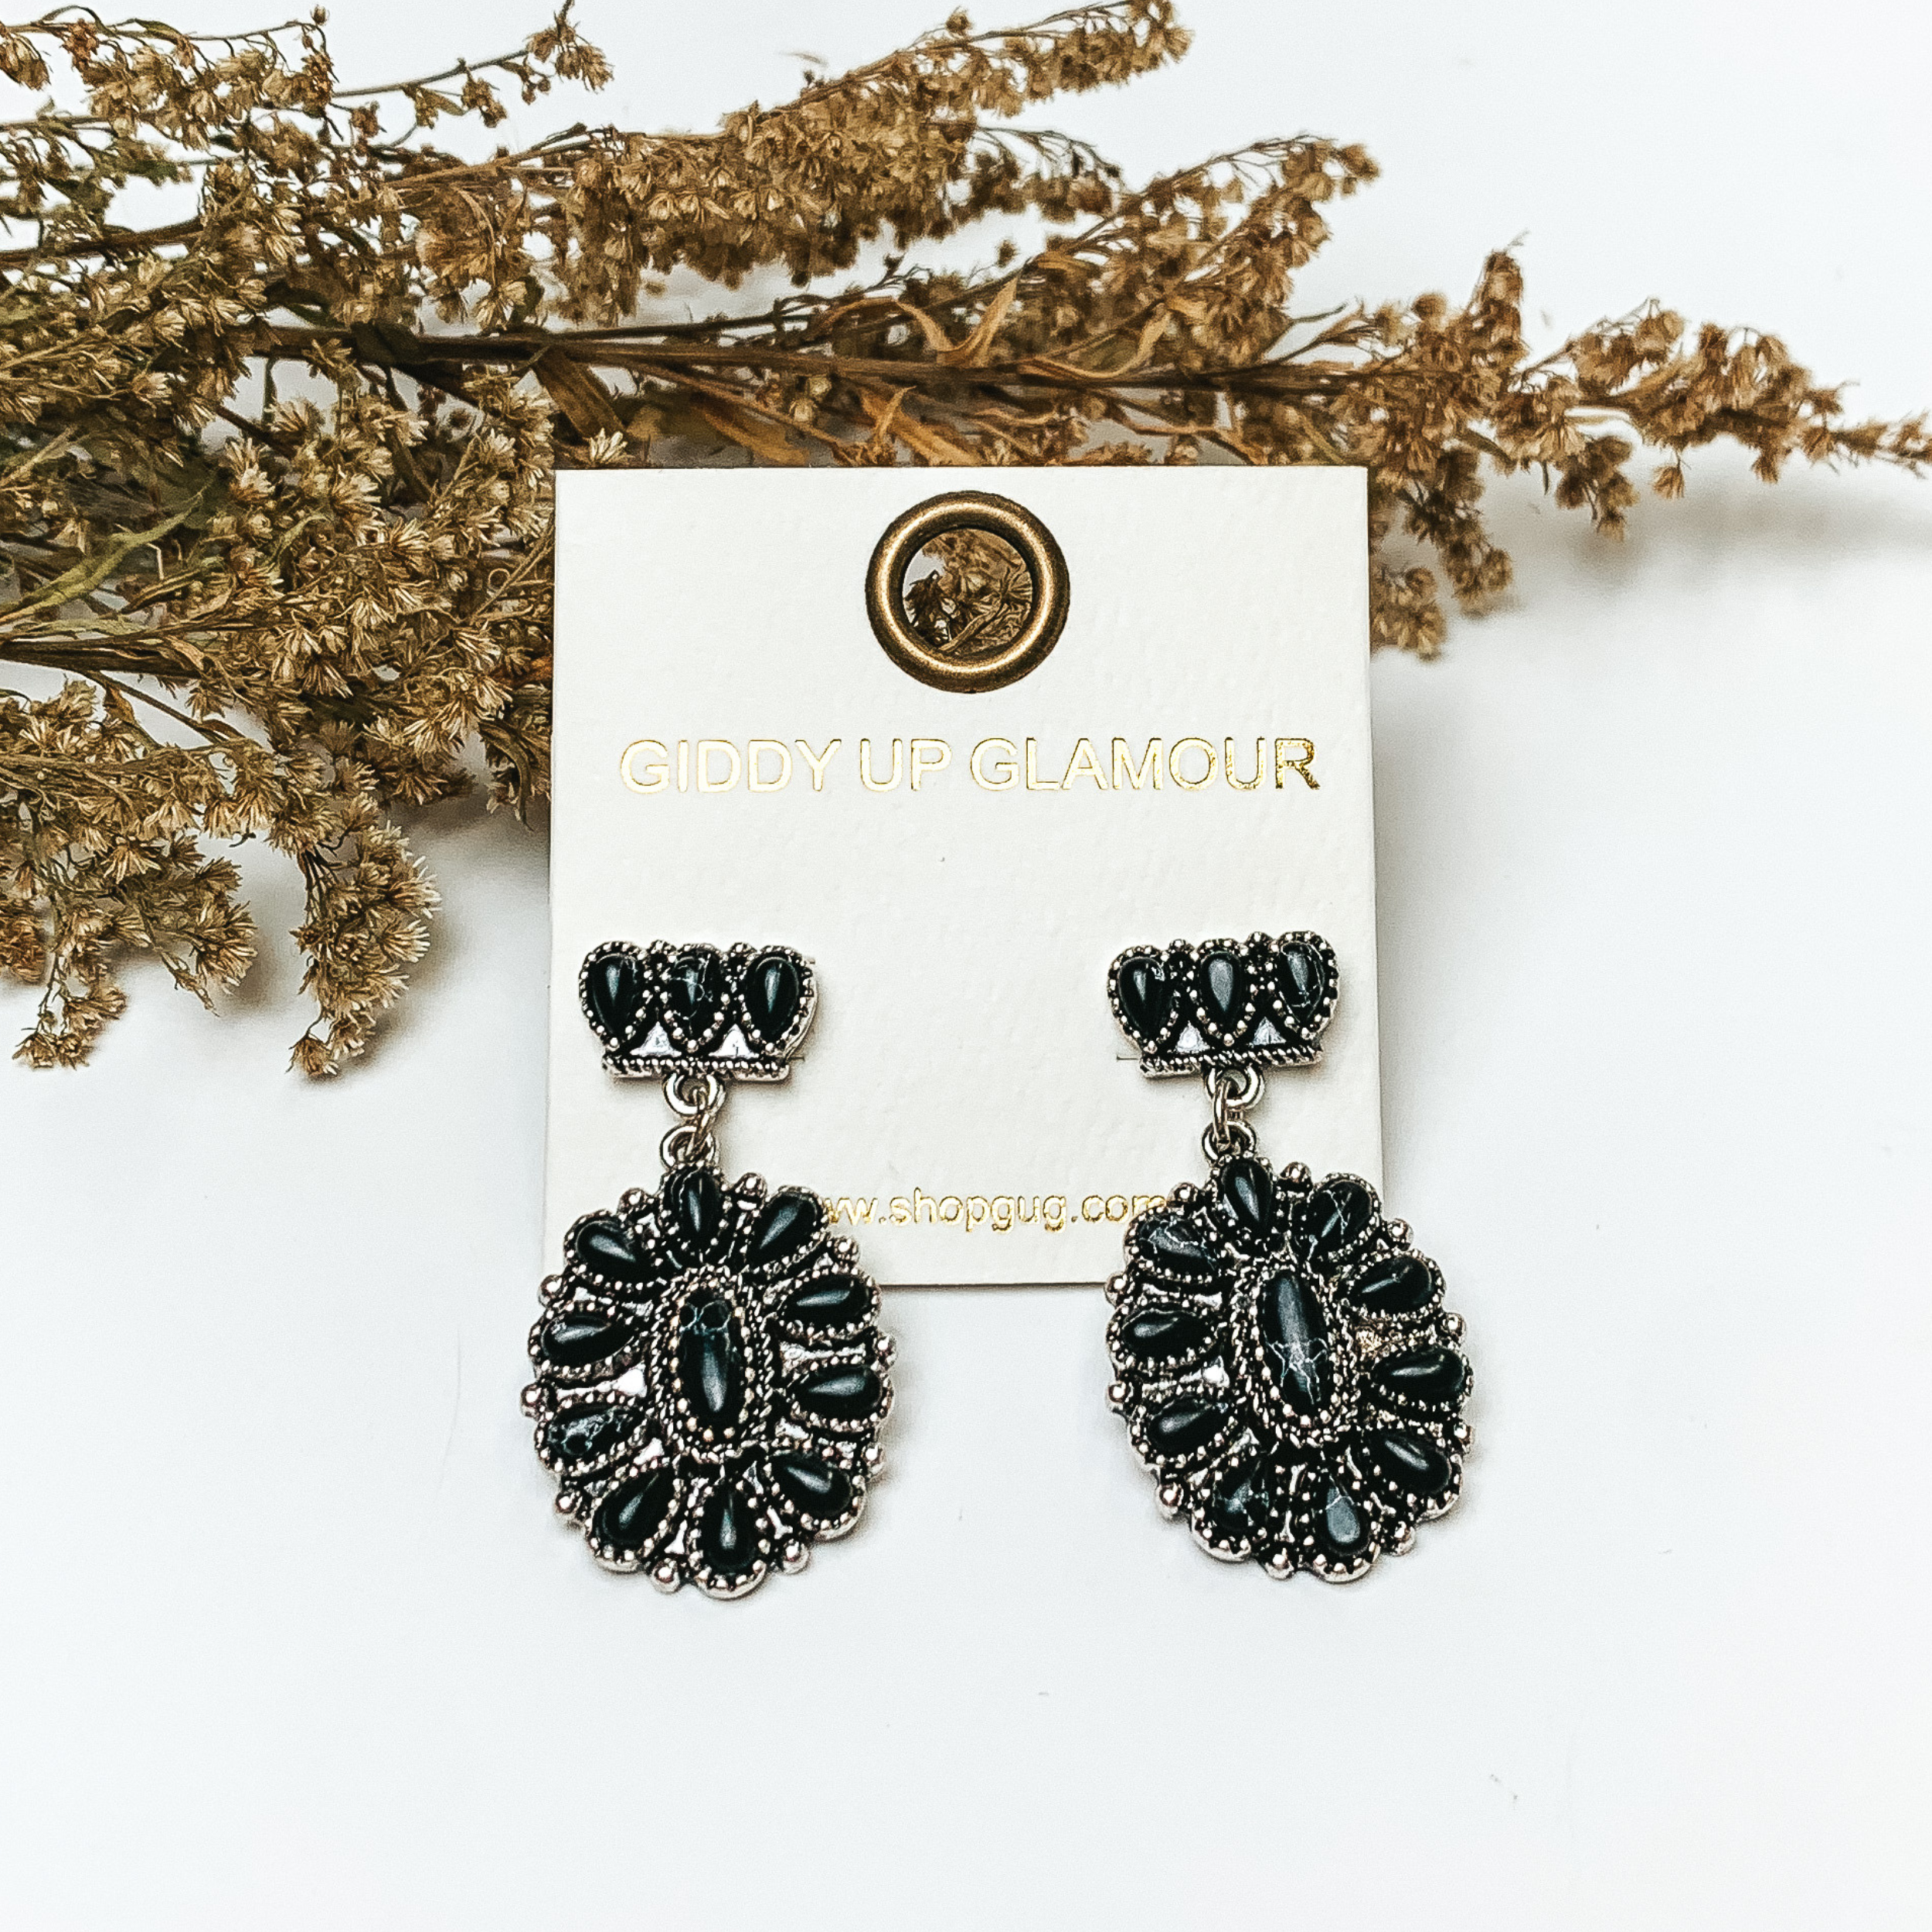 Silver tone cluster post earrings with oval cluster drop with black stones. These earrings are pictured on a white background with greenery behind the earrings.